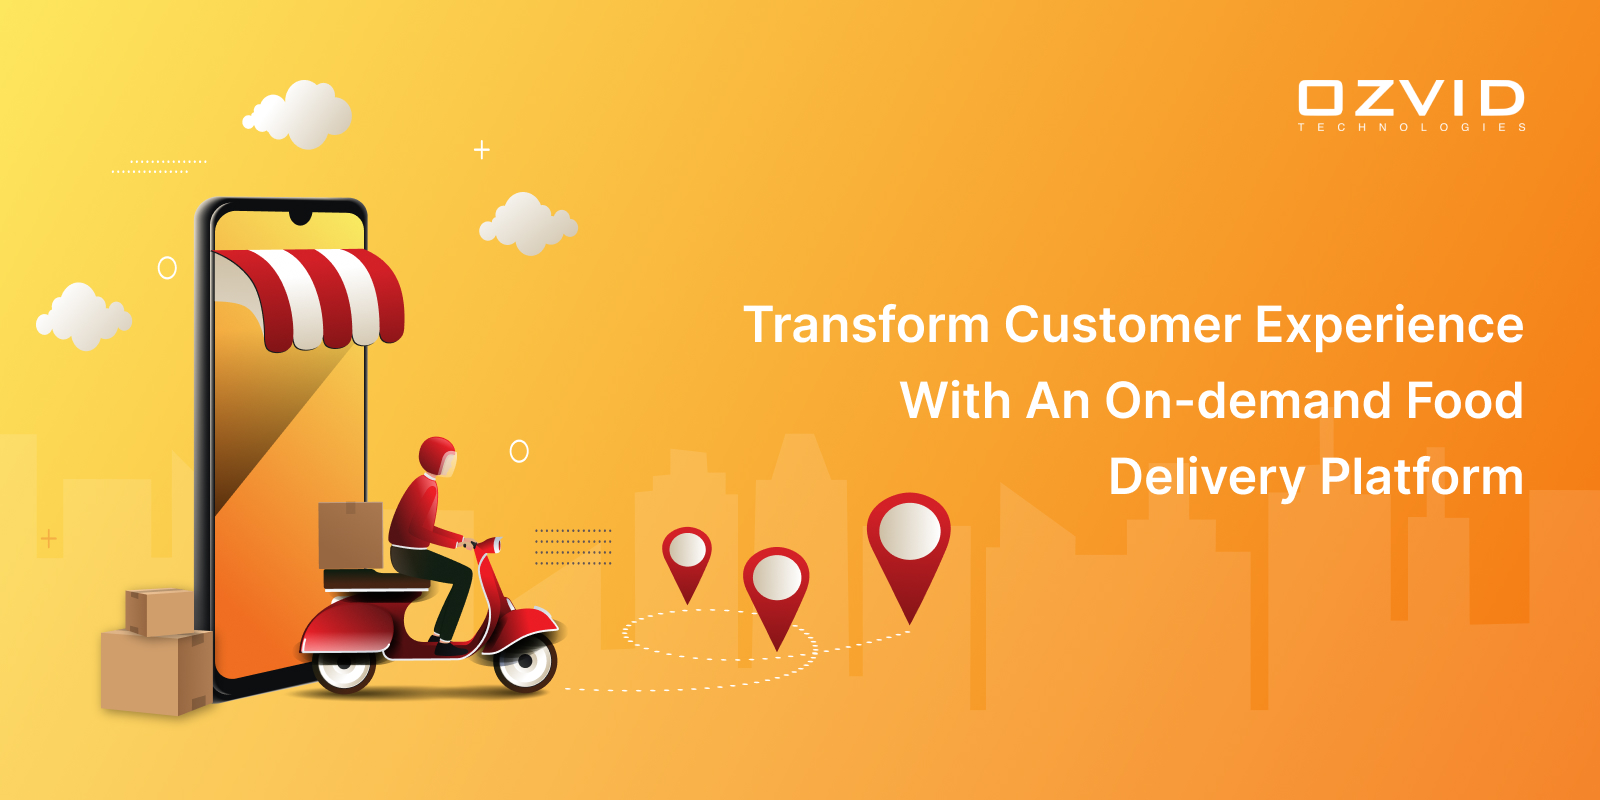 How Does An On-demand Food Delivery Platform Transform The Customer Experience?